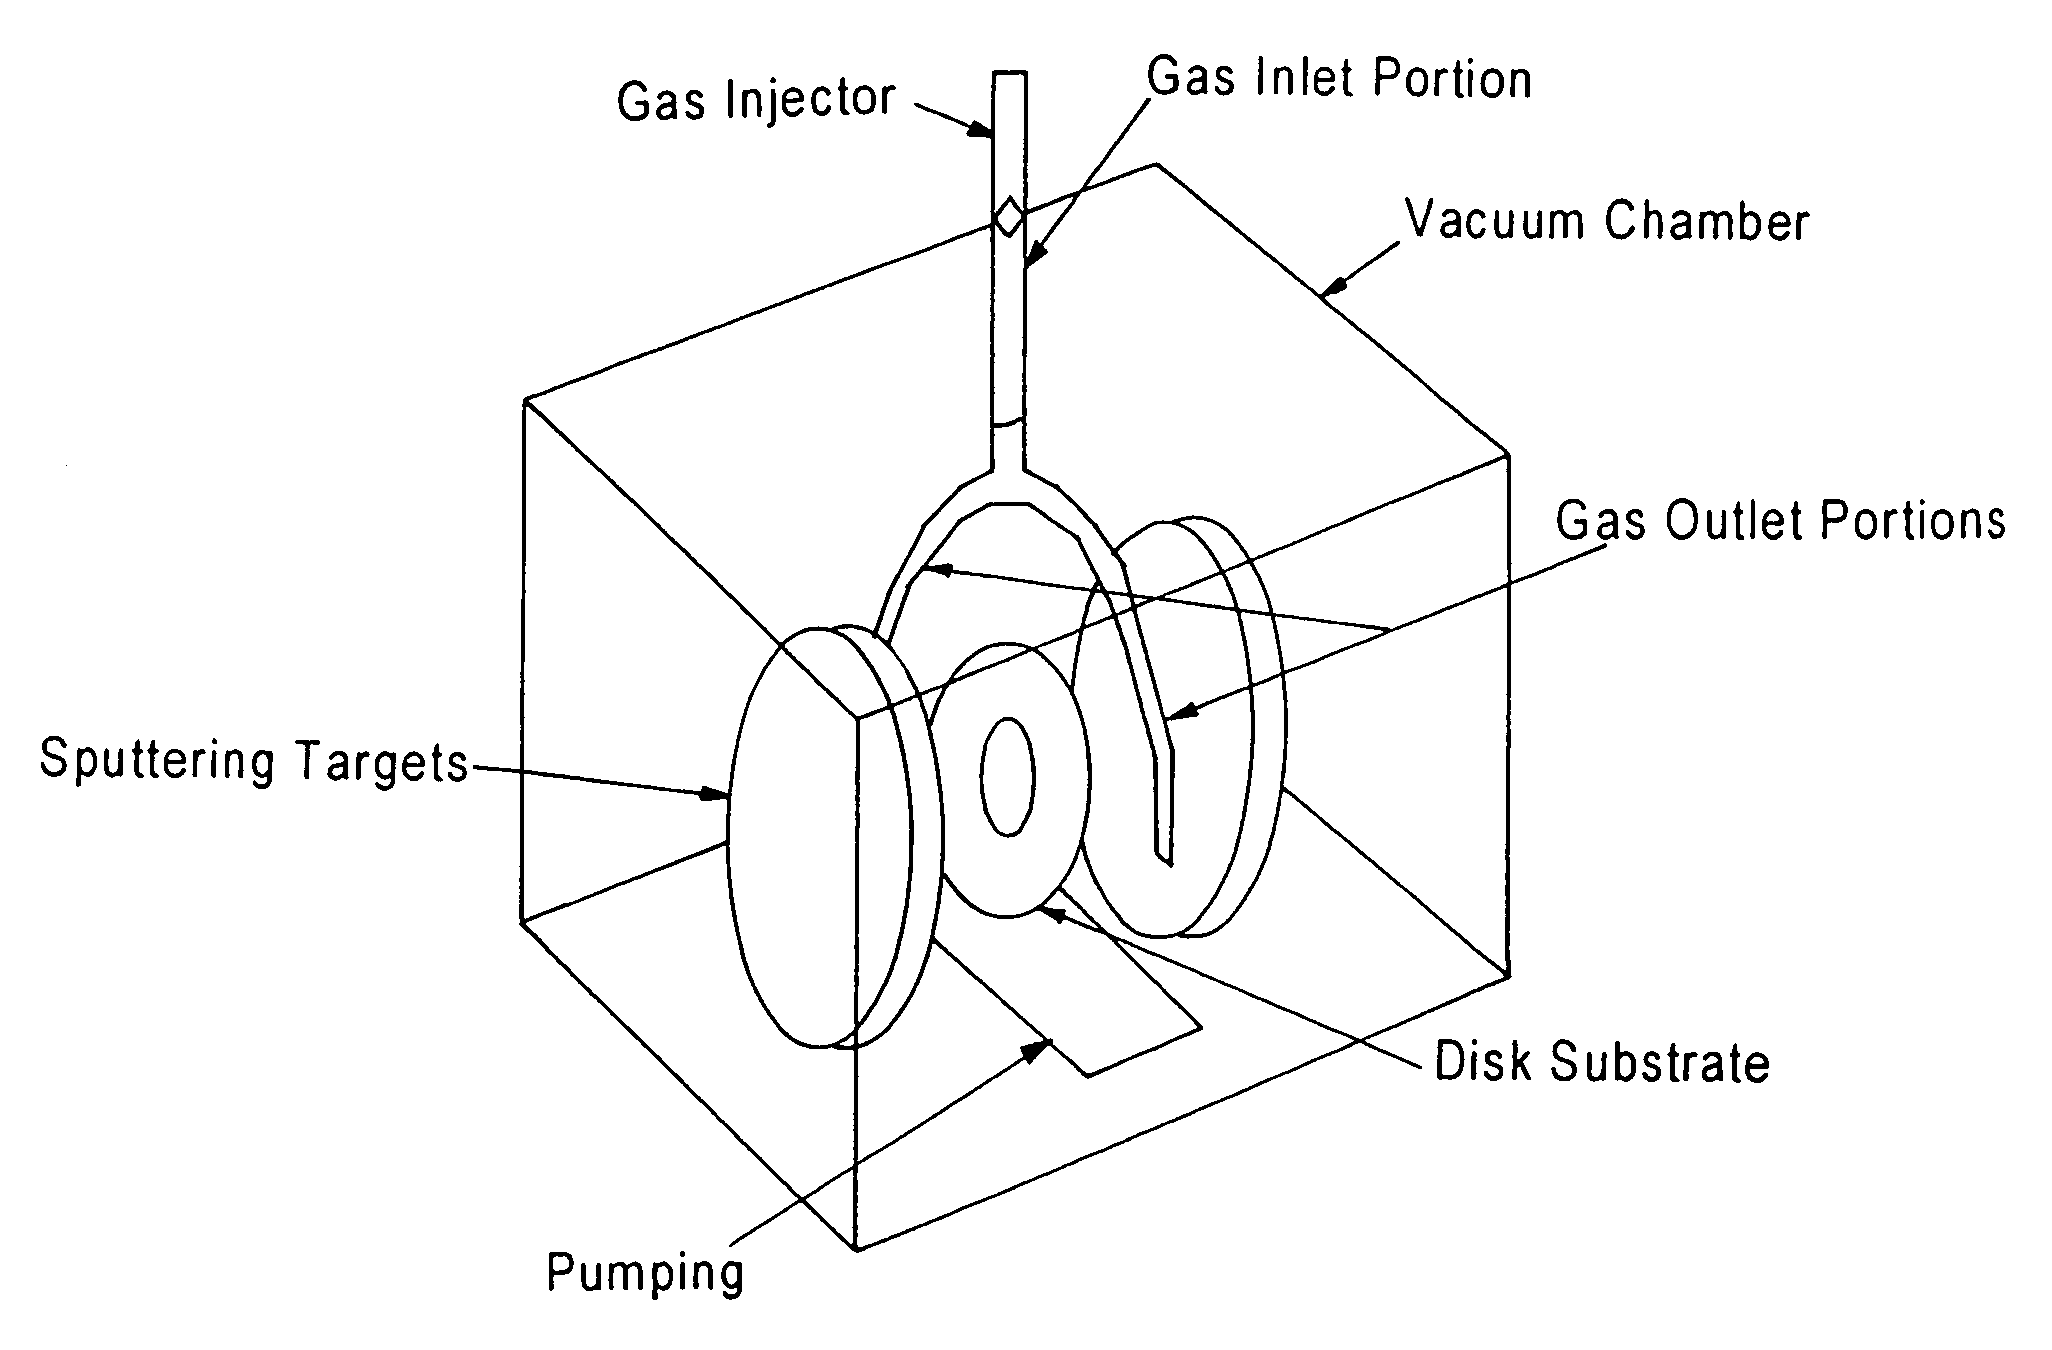 Gas injection for uniform composition reactively sputter-deposited thin films